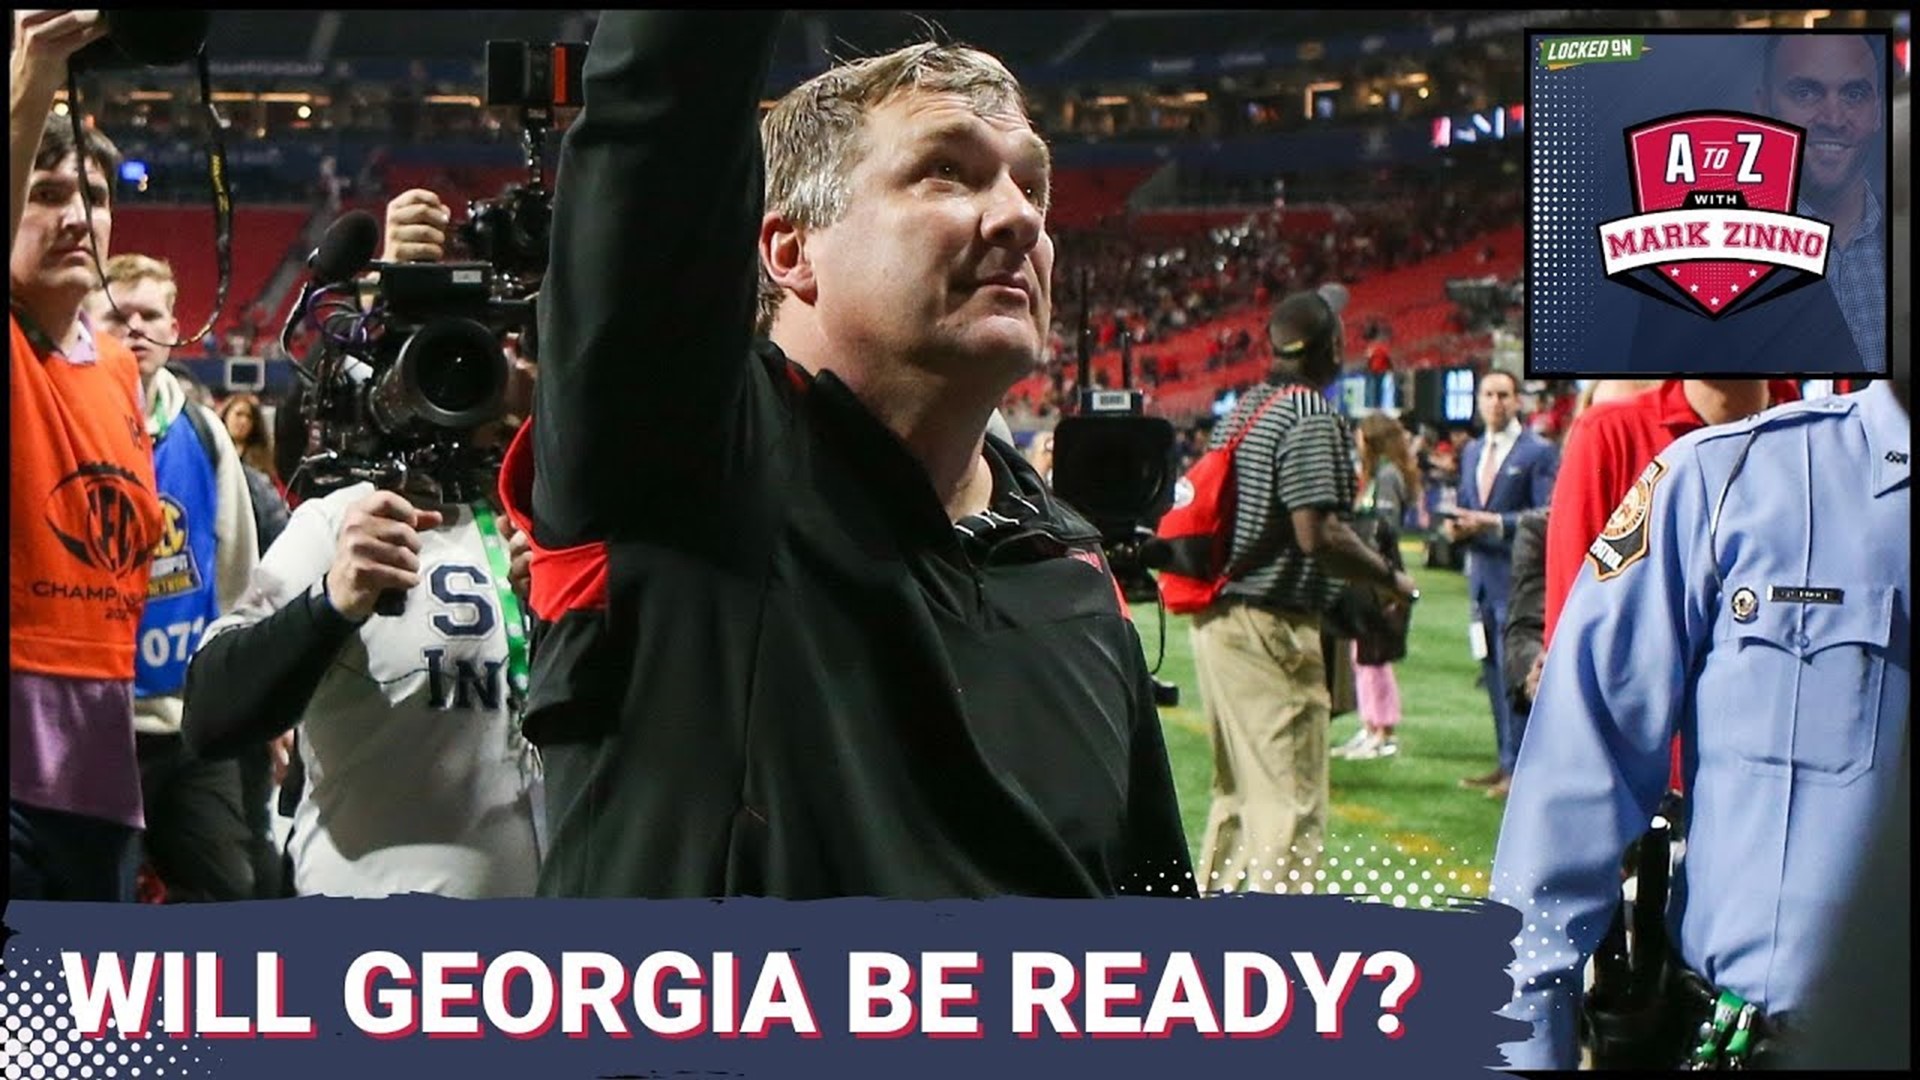 The Georgia Bulldogs Haven't Been Tested Yet... |A to Z With Mark Zinno